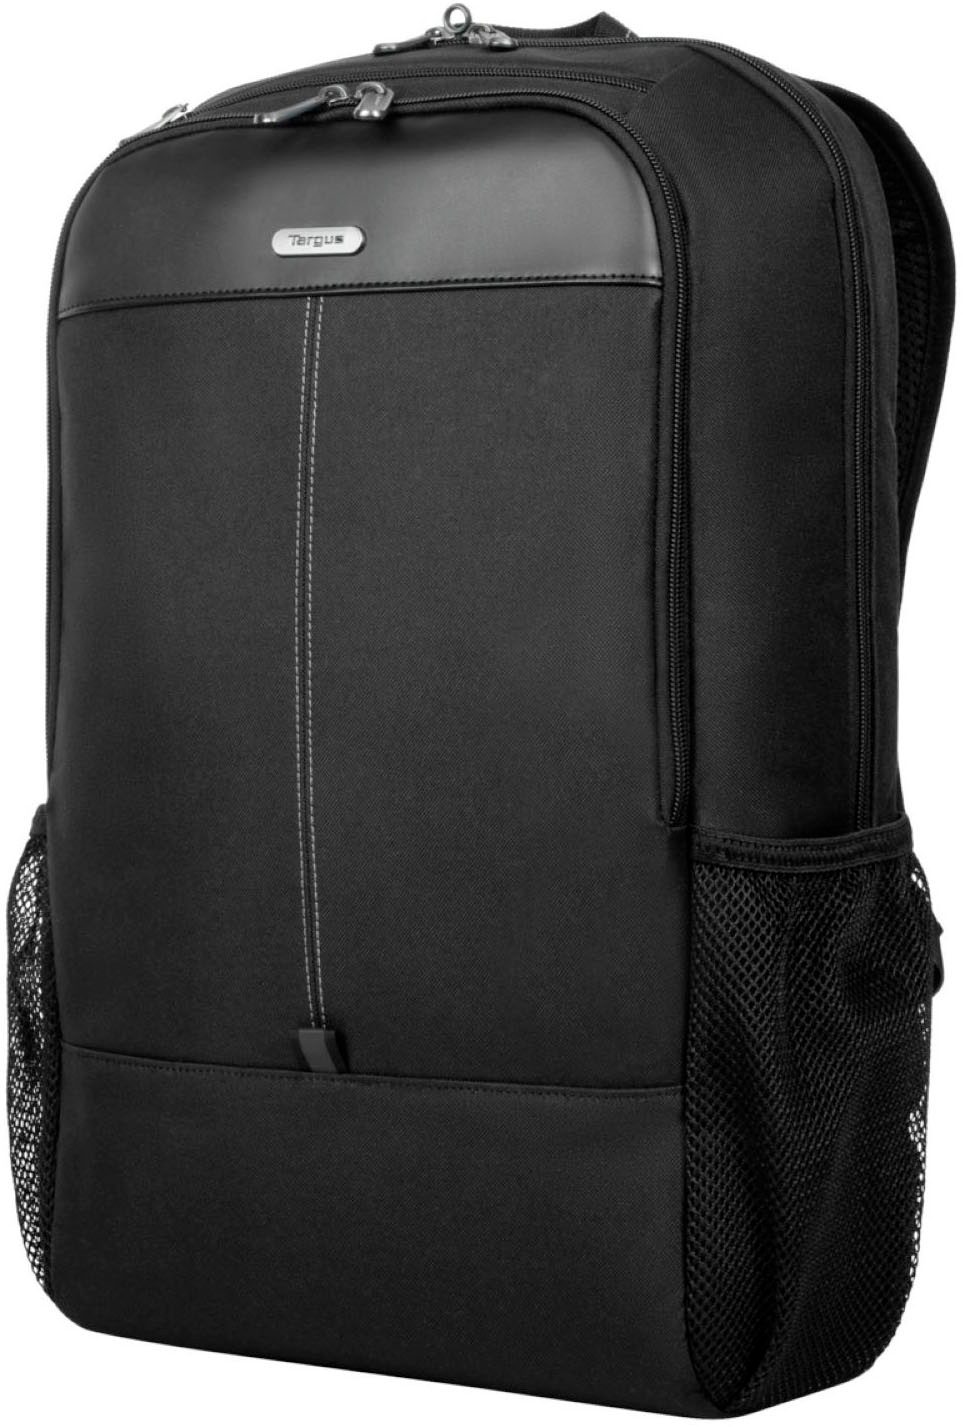 Angle View: Targus - 17" Classic Backpack - Black